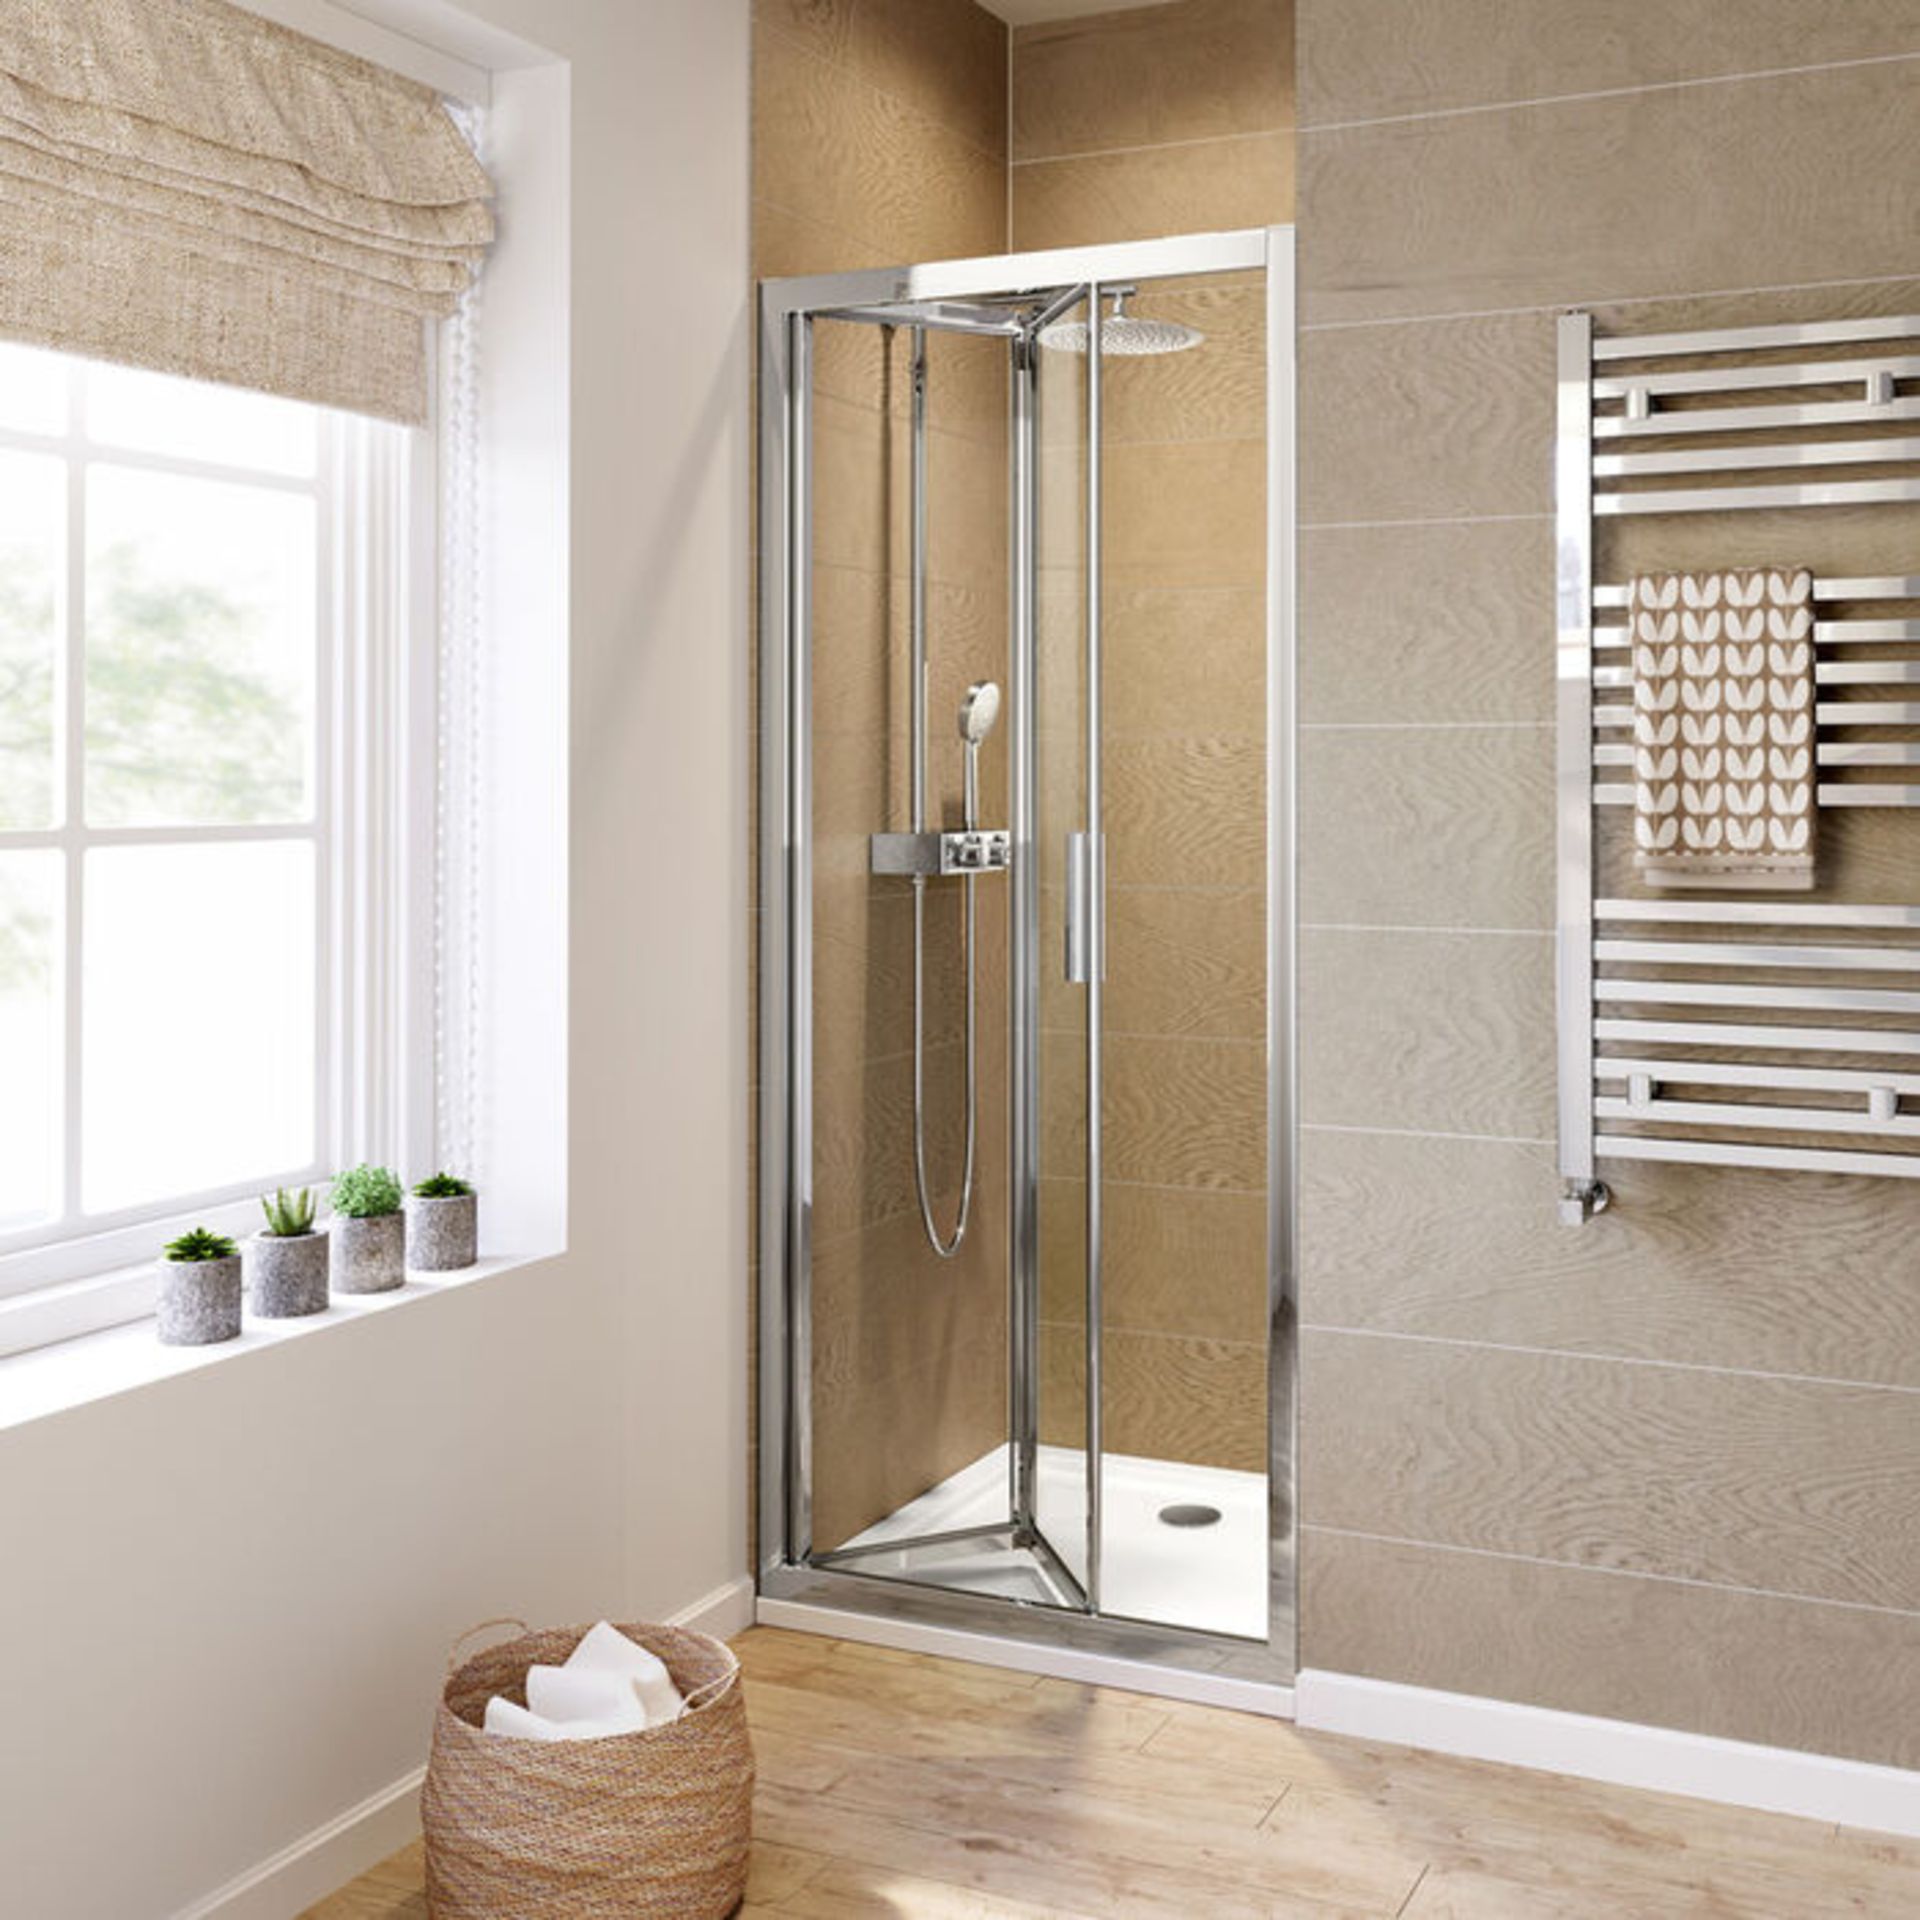 (DD37) 900mm - 6mm - Elements EasyClean Bifold Shower Door. RRP £299.99. 6mm Safety Glass - Si... - Image 3 of 3